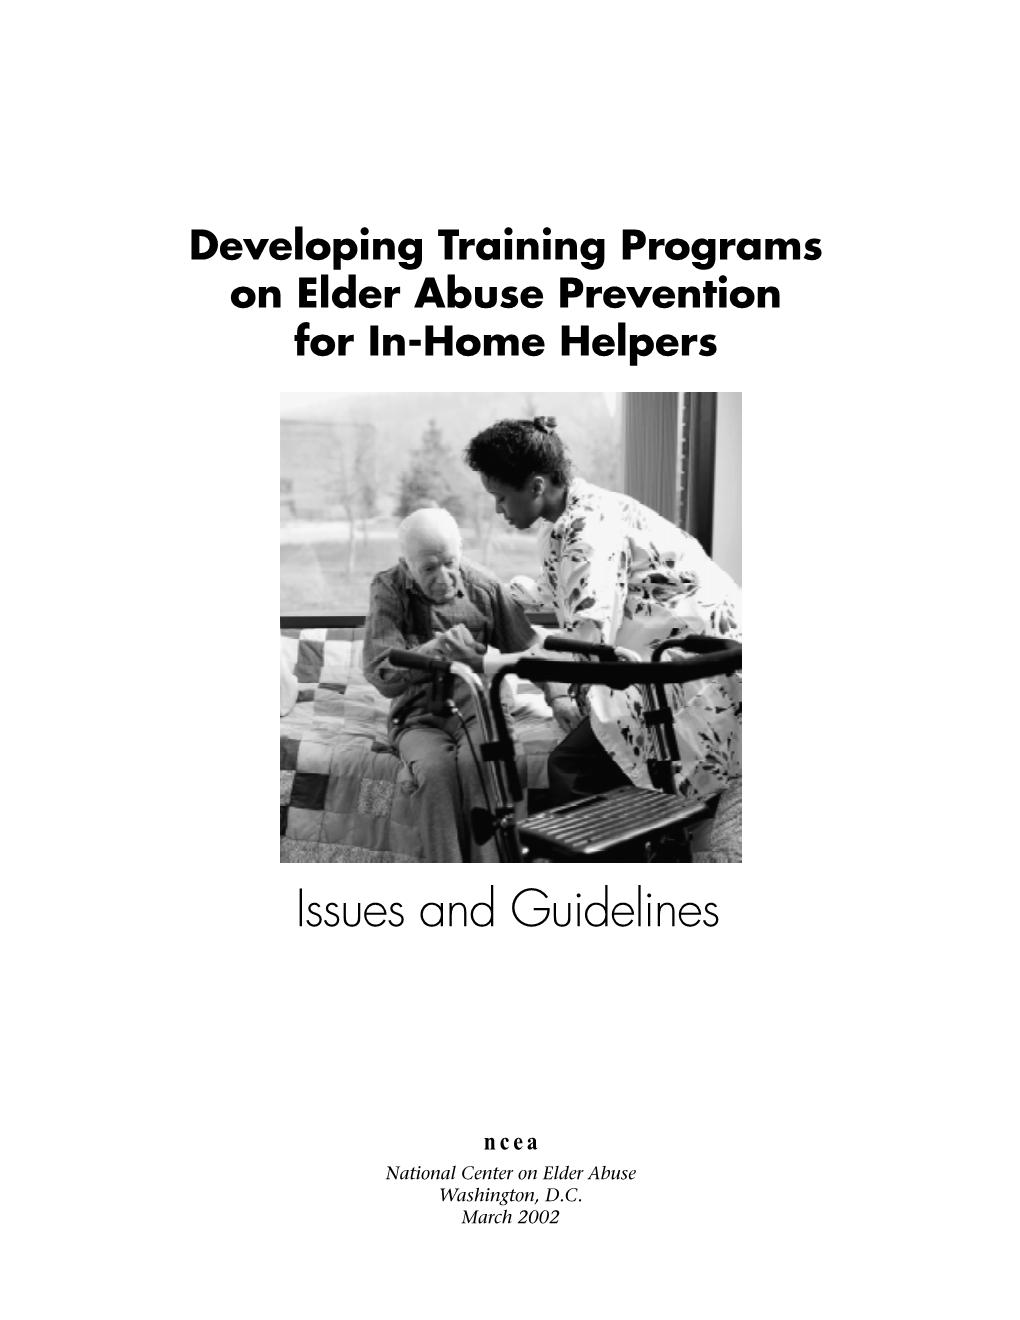 Developing Training Programs on Elder Abuse Prevention for In-Home Helpers